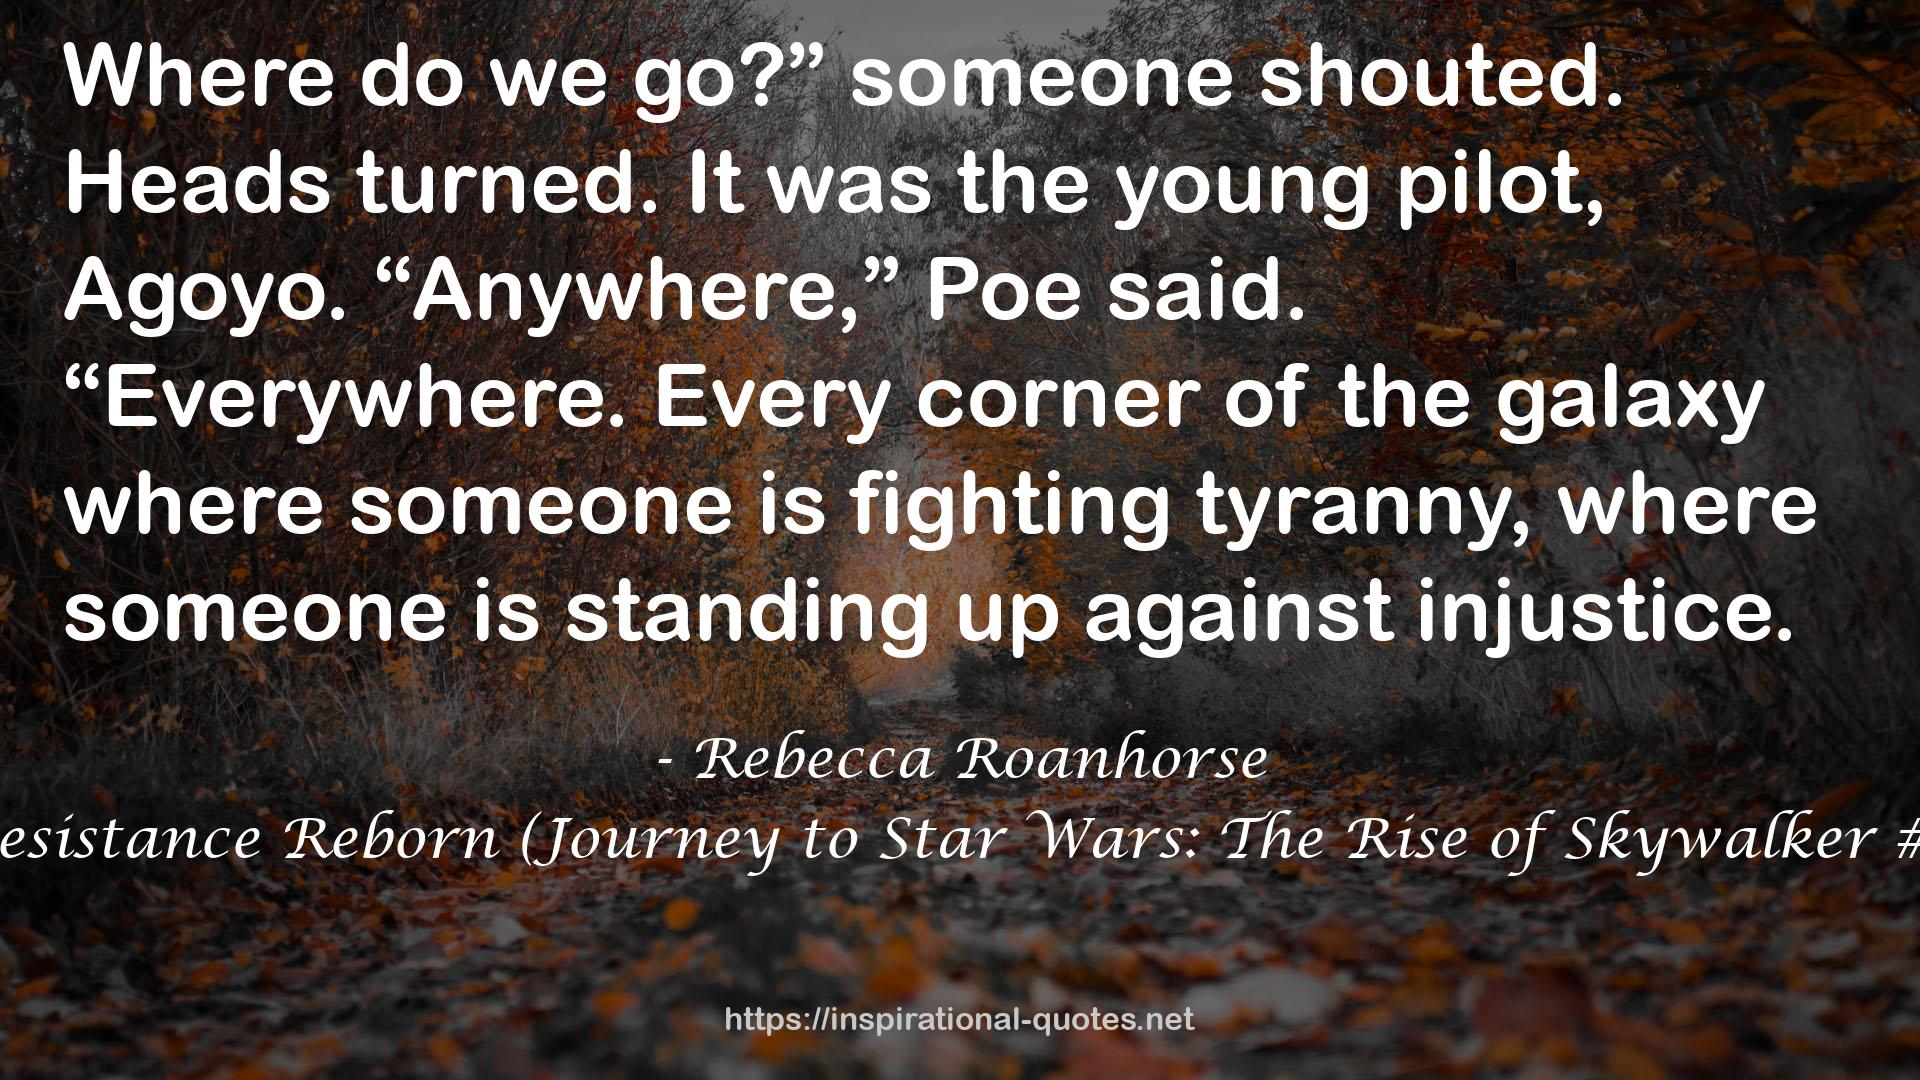 Resistance Reborn (Journey to Star Wars: The Rise of Skywalker #1) QUOTES